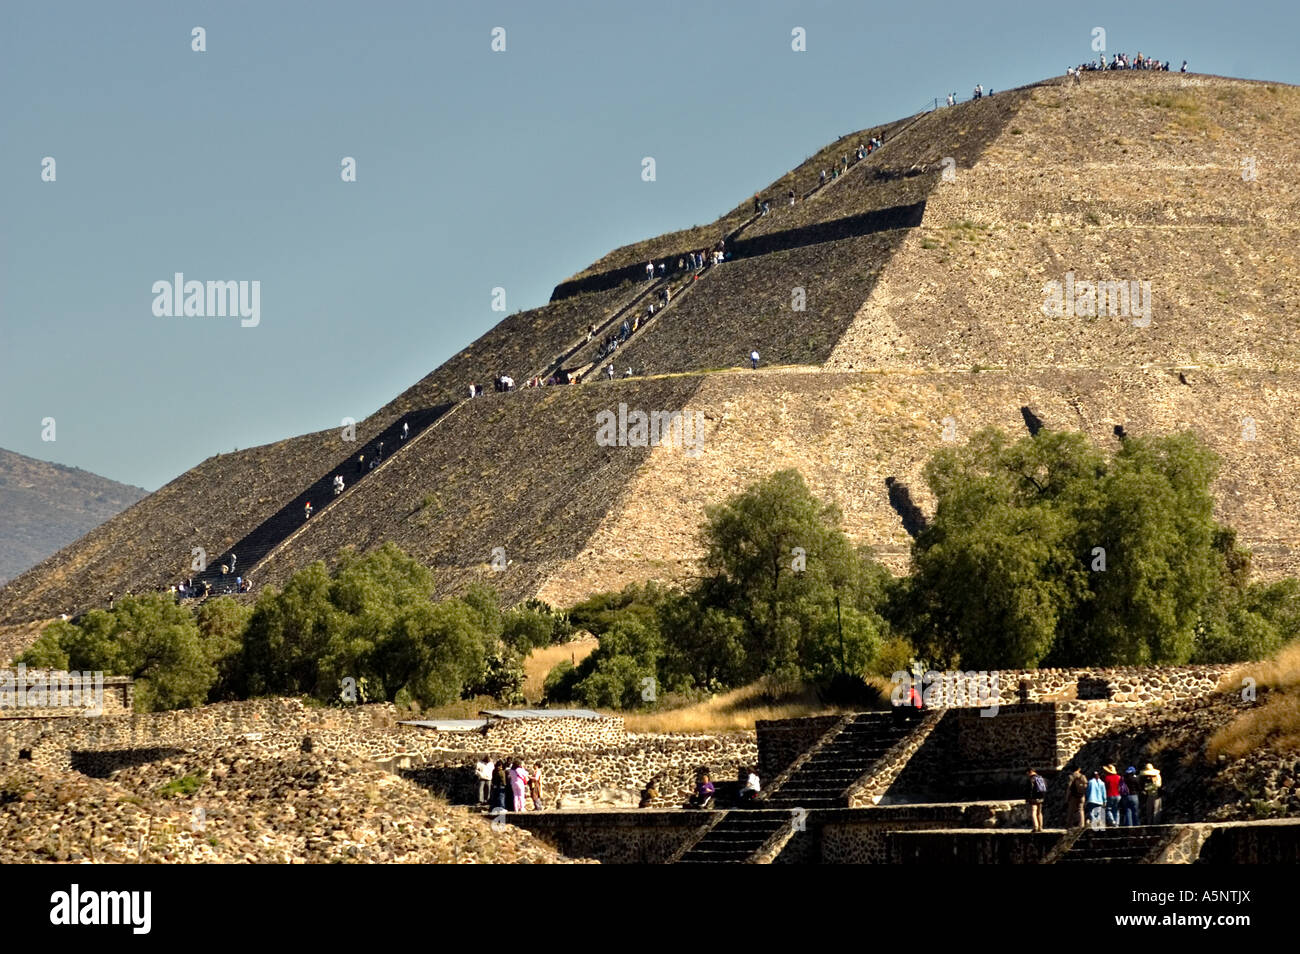 Pyramid of the Sun - Teotihuacan - Mexico Stock Photo - Alamy